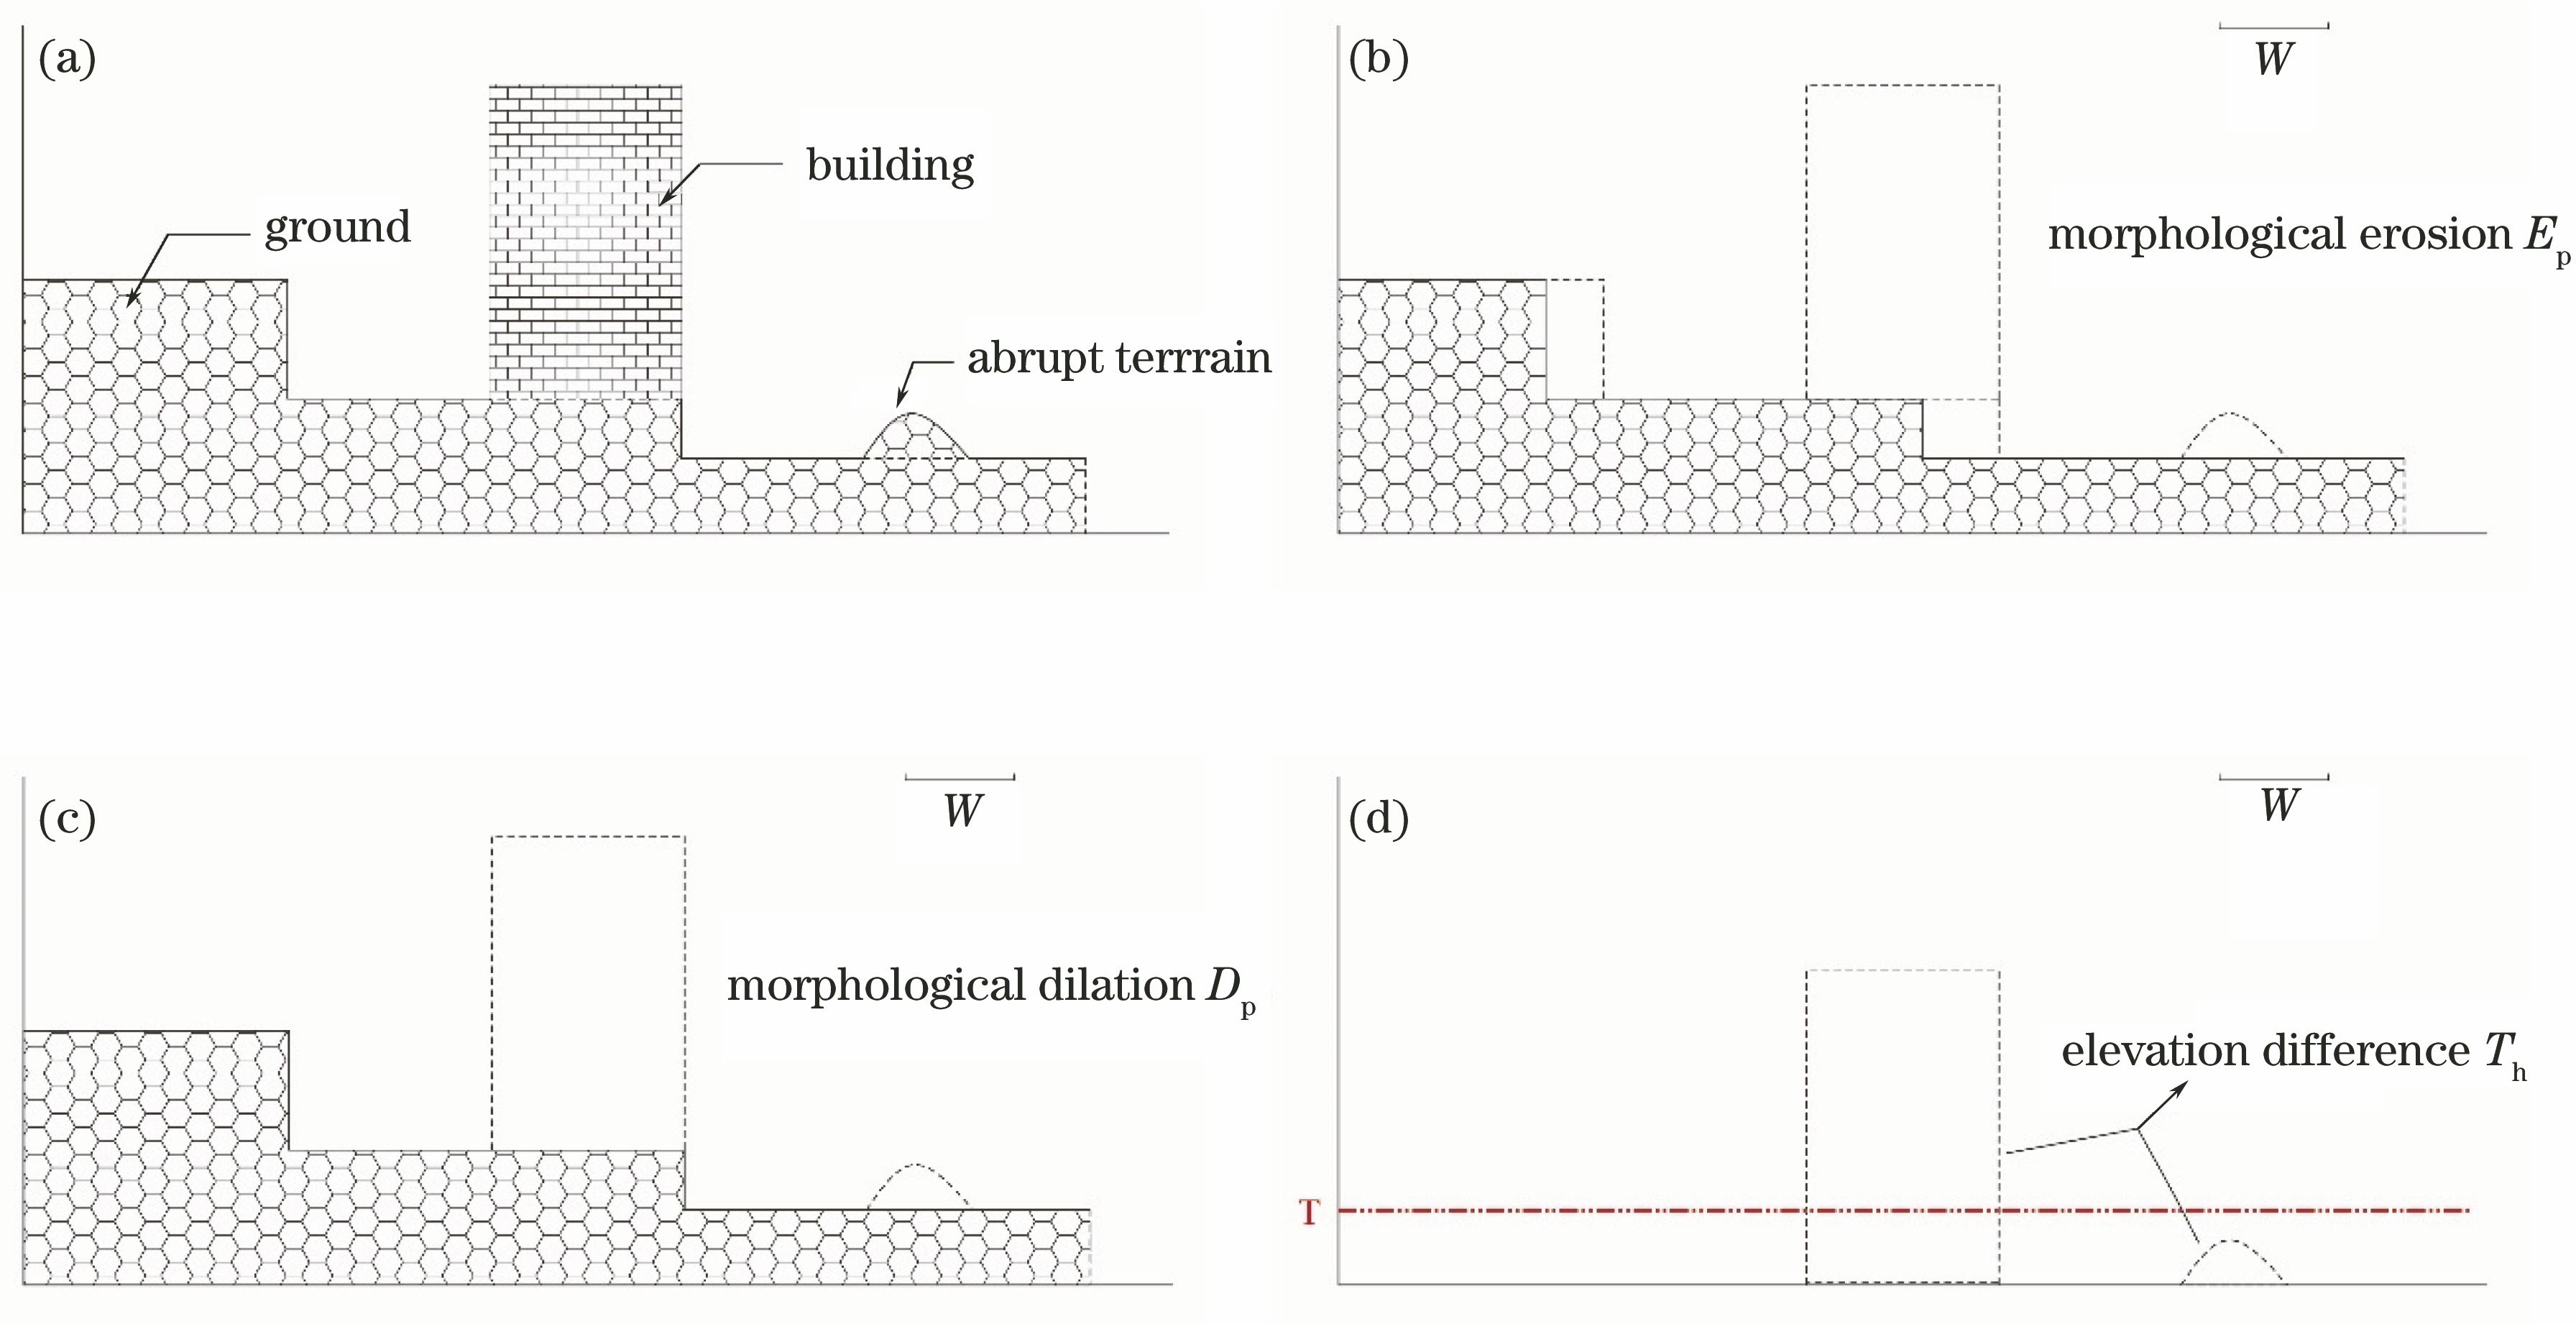 Sketch map of morphological filtering process. (a) Two-dimensional surface; (b) morphological erosion operation; (c) morphological dilation operation; (d) point cloud filtering result